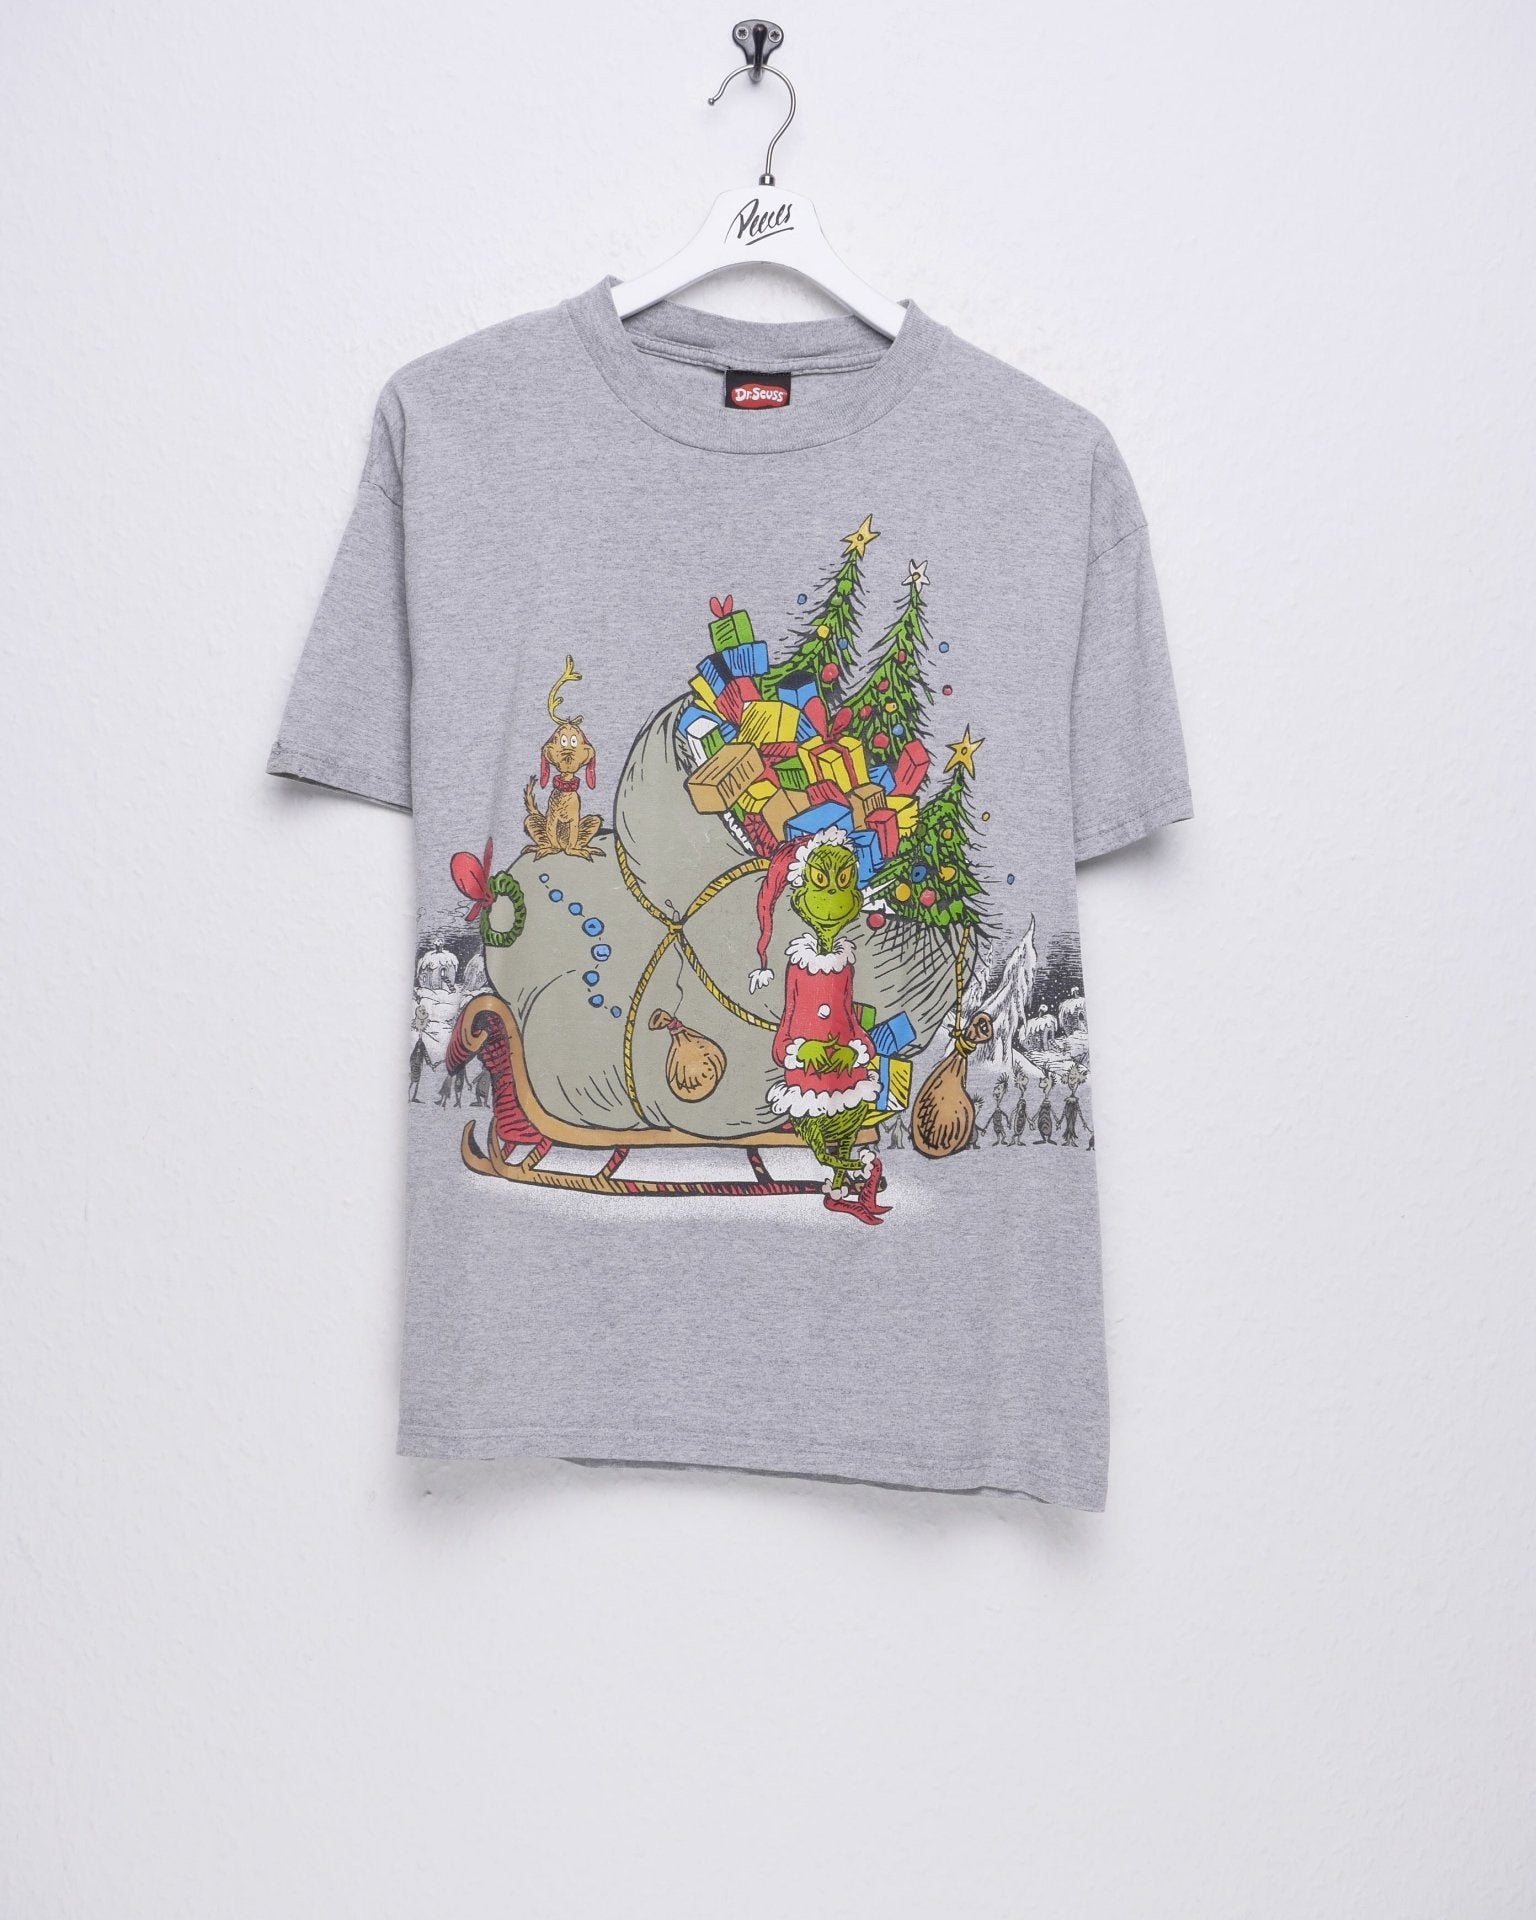 The Grinch Christmas printed Graphic Vintage Shirt - Peeces